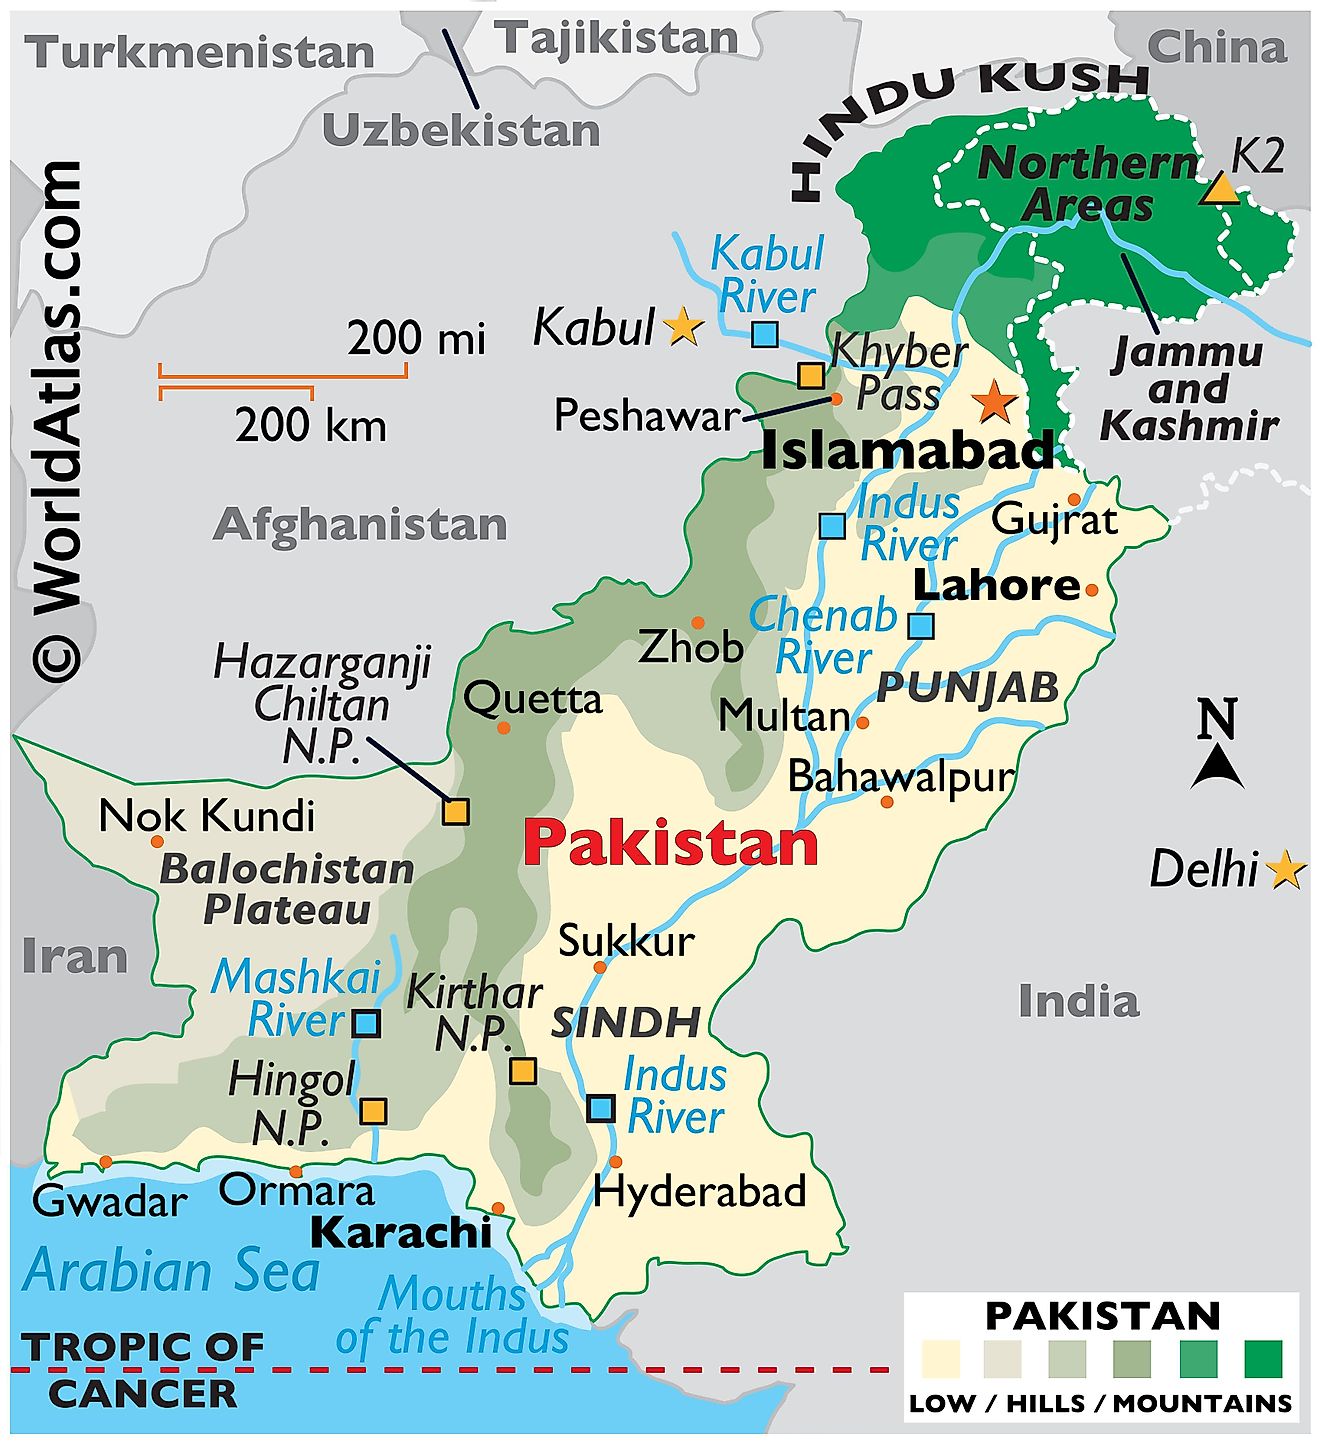 Physical Map of Pakistan showing state boundaries, relief, Mount K2, the Indus River and its tributaries, important cities, and more.